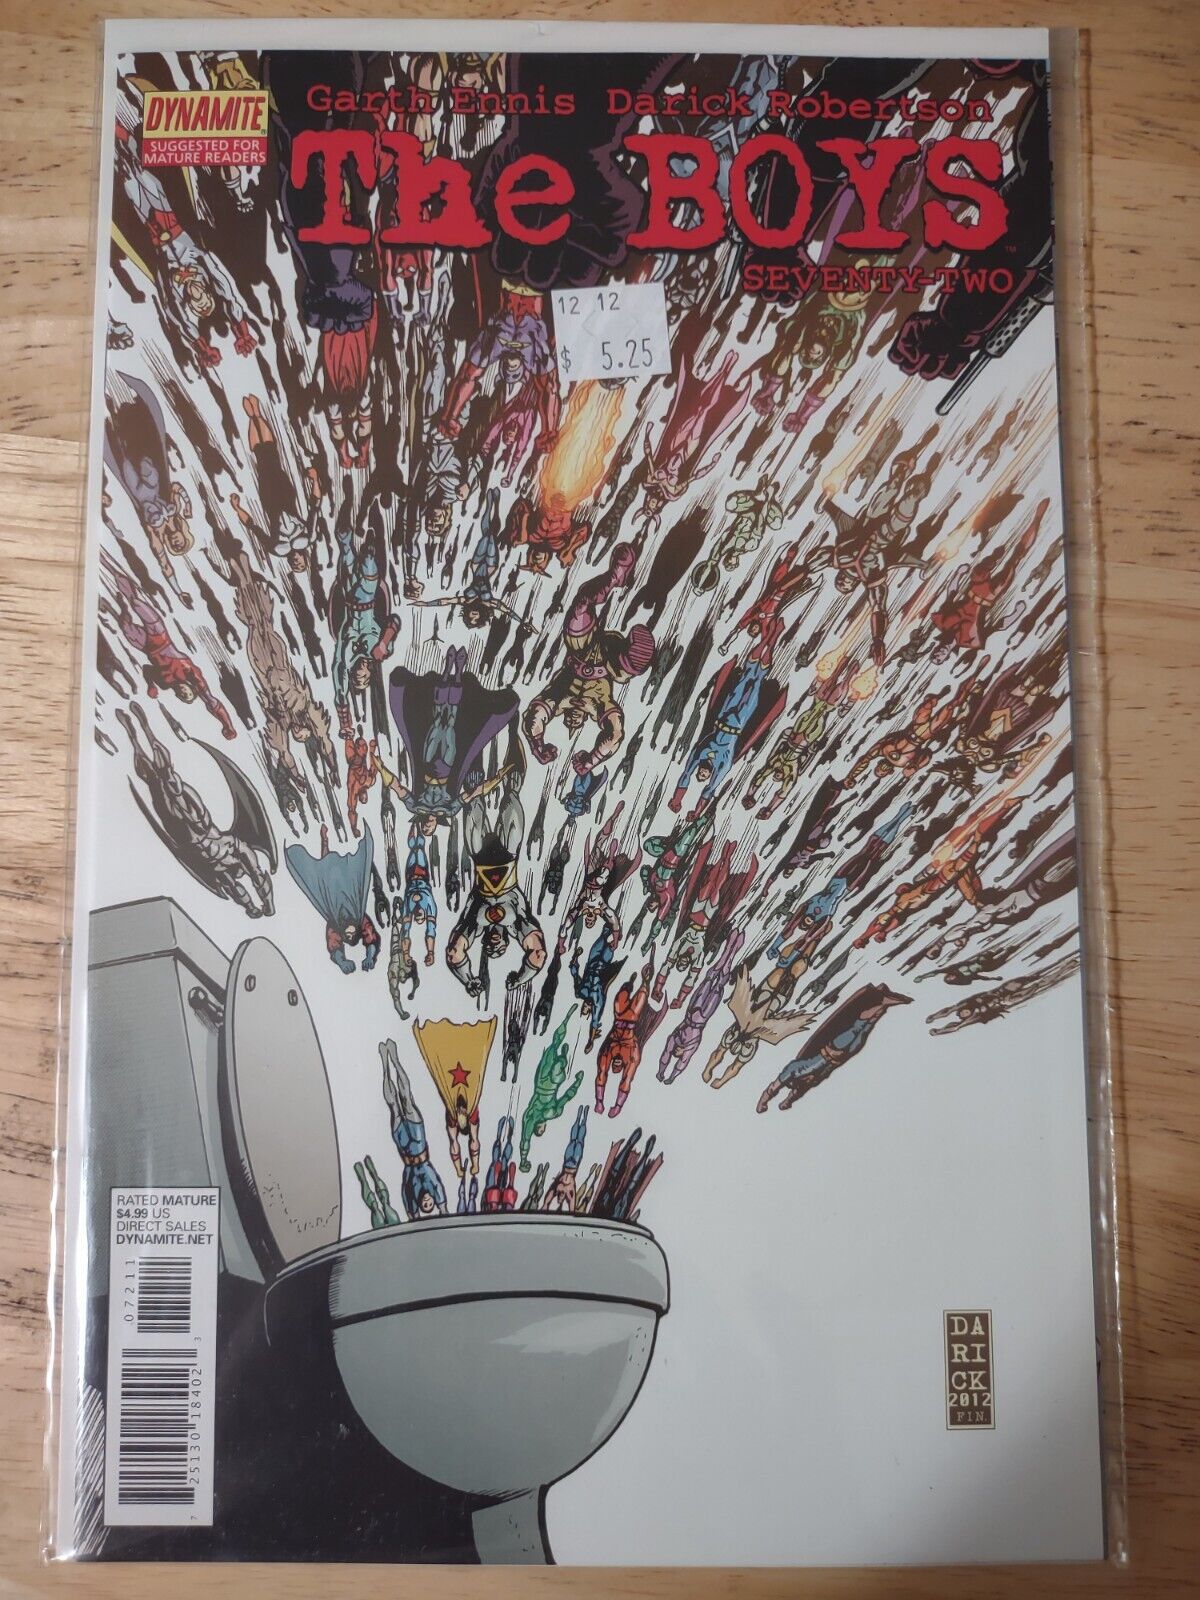 The Boys #72 by Garth Ennis (FINAL ISSUE) *$5 FLAT RATE SHIPPING ON COMICS